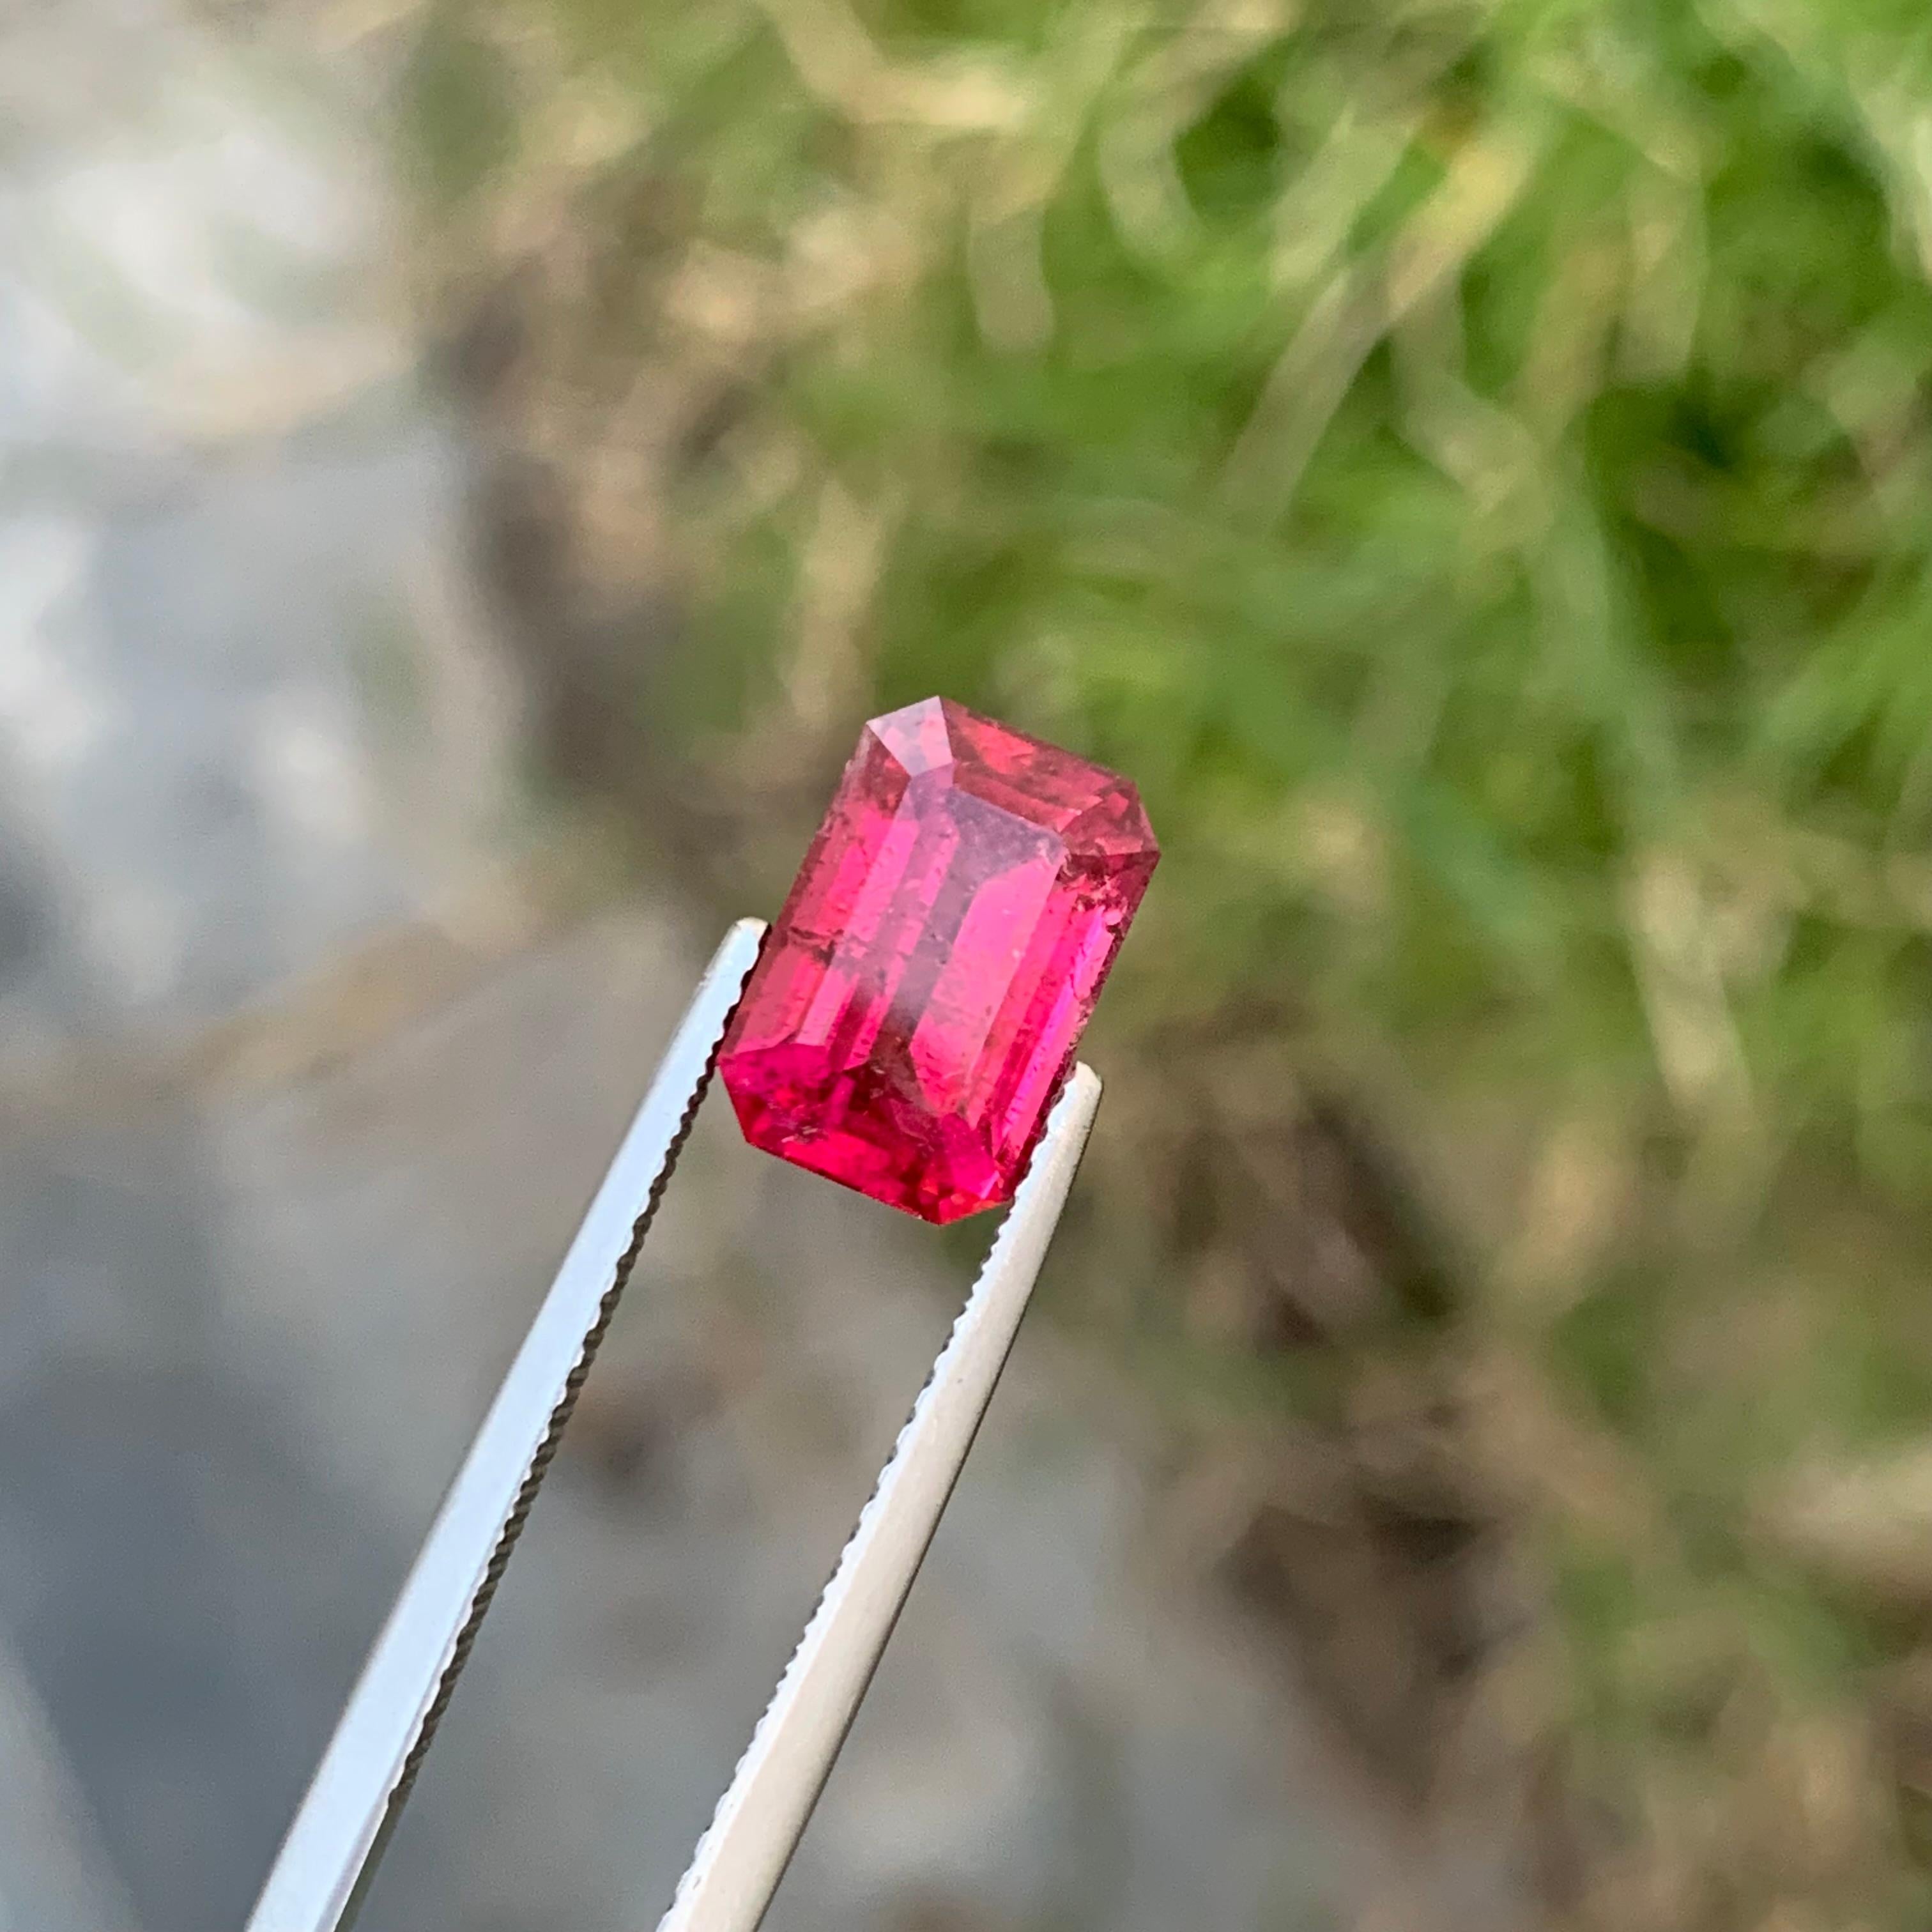 Loose Rubellite Tourmaline

Weight: 3.15 Carats
Dimension: 10.2 x 6.8 x 5.6 Mm
Origin: Afghanistan
Shape: Emerald 
Color: Pink
Certificate: On Demand

Rubellite tourmaline, often regarded as the 